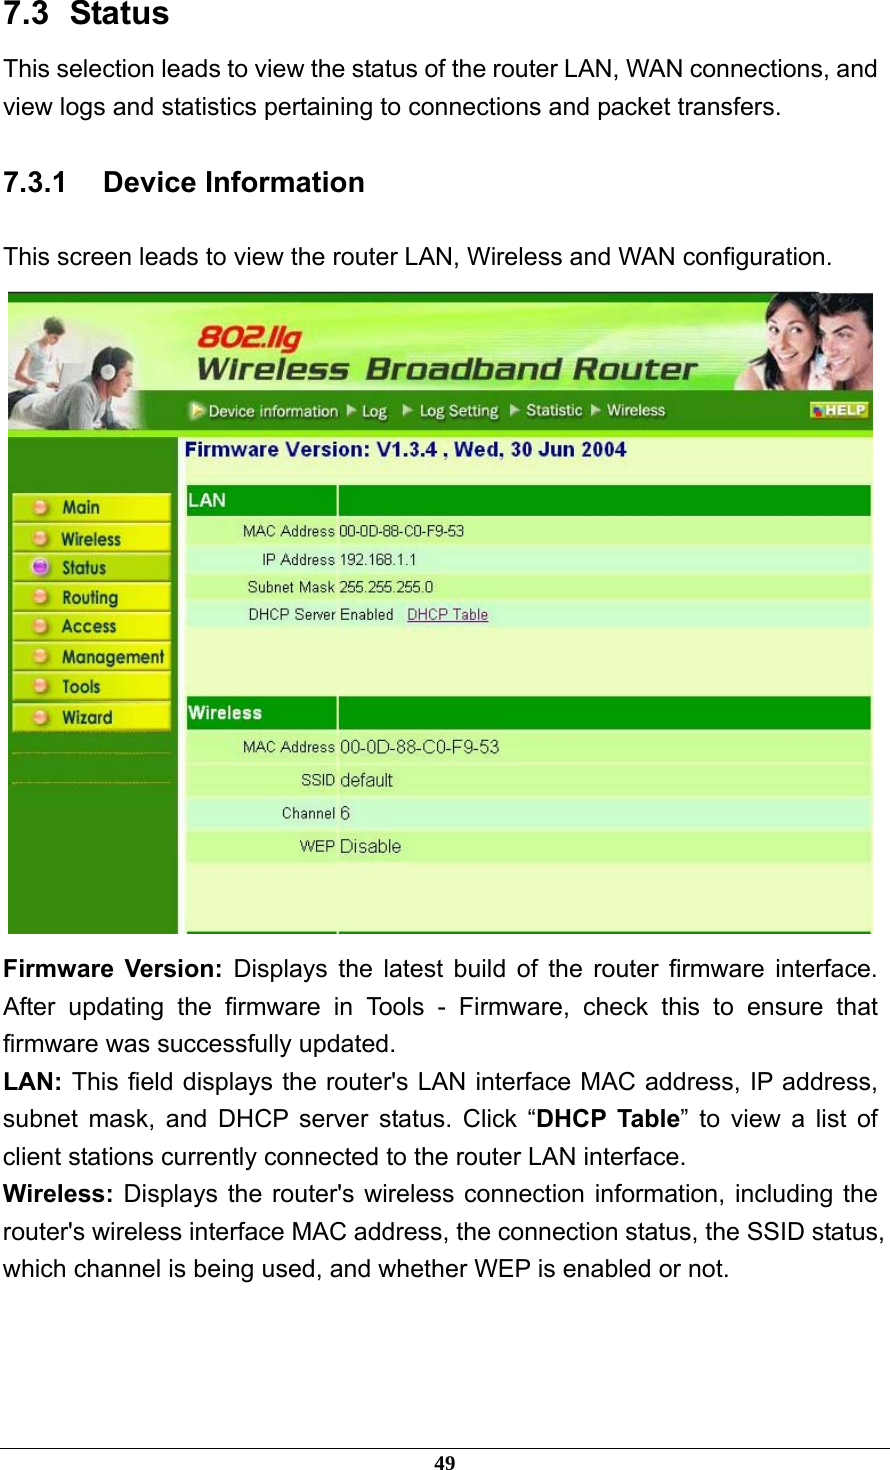 7.3   Status This selection leads to view the status of the router LAN, WAN connections, and view logs and statistics pertaining to connections and packet transfers. 7.3.1 Device Information This screen leads to view the router LAN, Wireless and WAN configuration.  Firmware Version: Displays the latest build of the router firmware interface. After updating the firmware in Tools - Firmware, check this to ensure that firmware was successfully updated. LAN: This field displays the router&apos;s LAN interface MAC address, IP address, subnet mask, and DHCP server status. Click “DHCP Table” to view a list of client stations currently connected to the router LAN interface. Wireless: Displays the router&apos;s wireless connection information, including the router&apos;s wireless interface MAC address, the connection status, the SSID status, which channel is being used, and whether WEP is enabled or not.  49 